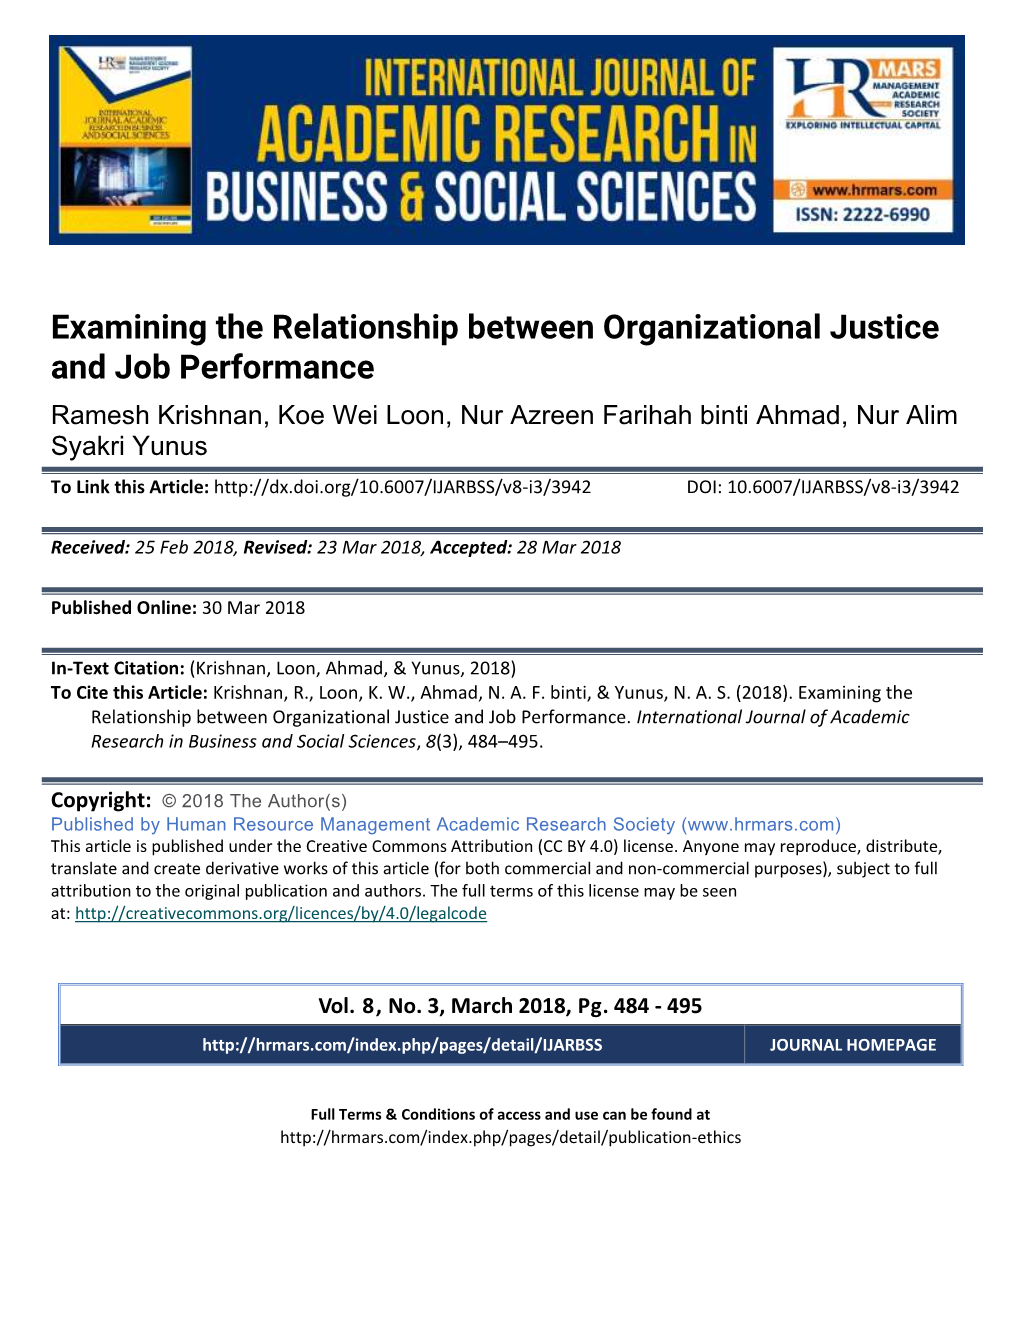 Examining the Relationship Between Organizational Justice and Job Performance